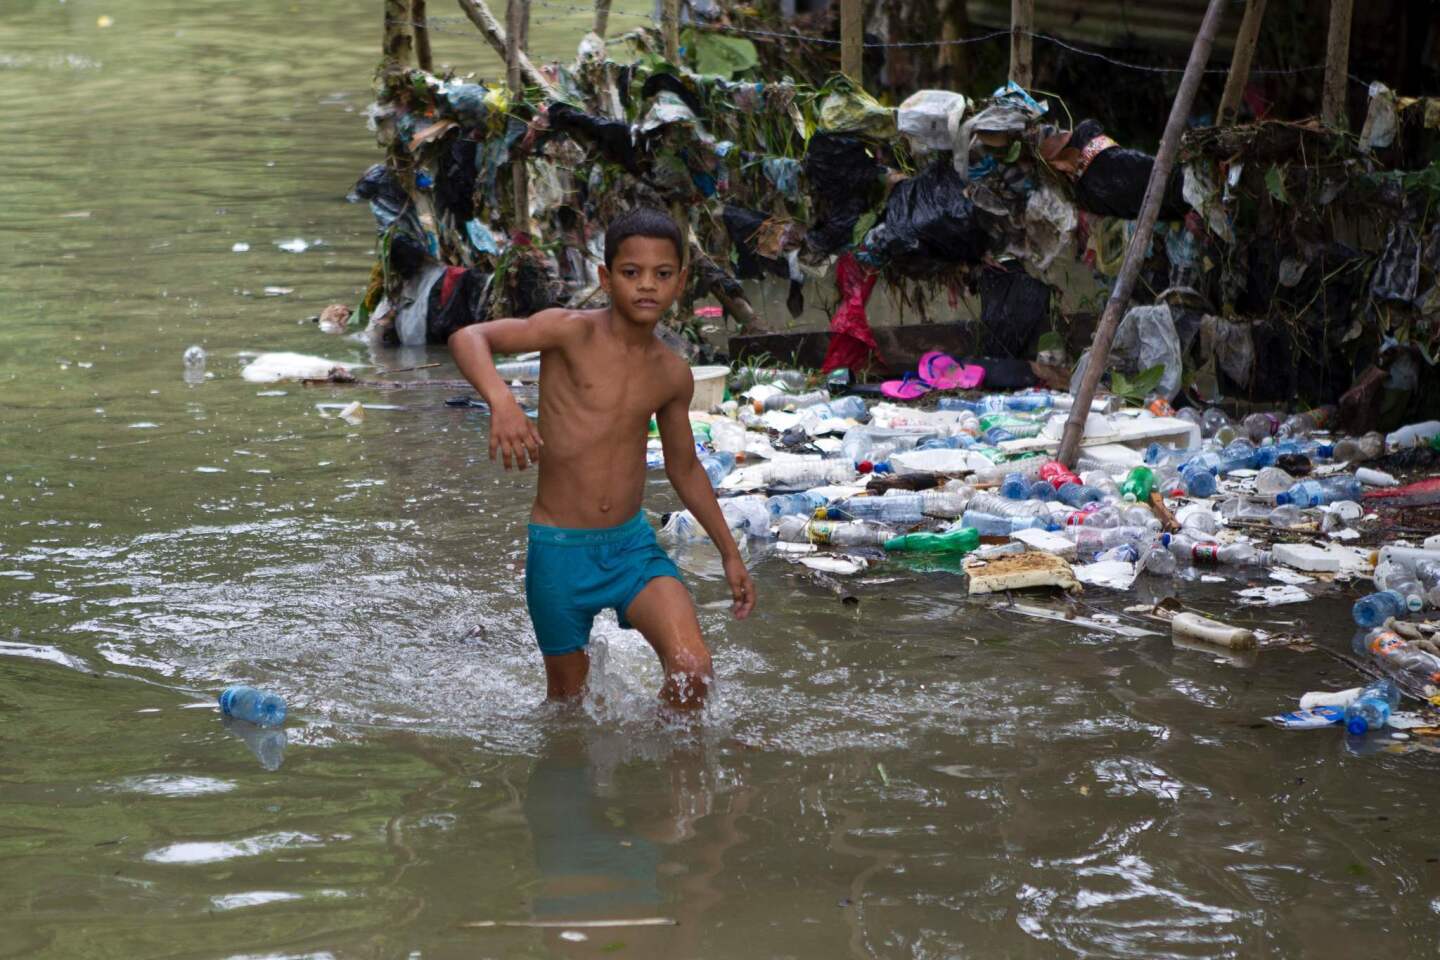 A boy wades through the water the flooded neighbourhood of La Puya, Santo Domingo, on Oct. 4, 2016 after the passage of Hurricane Matthew through Hispaniola -- the island that the Dominican Republic shares with Haiti.